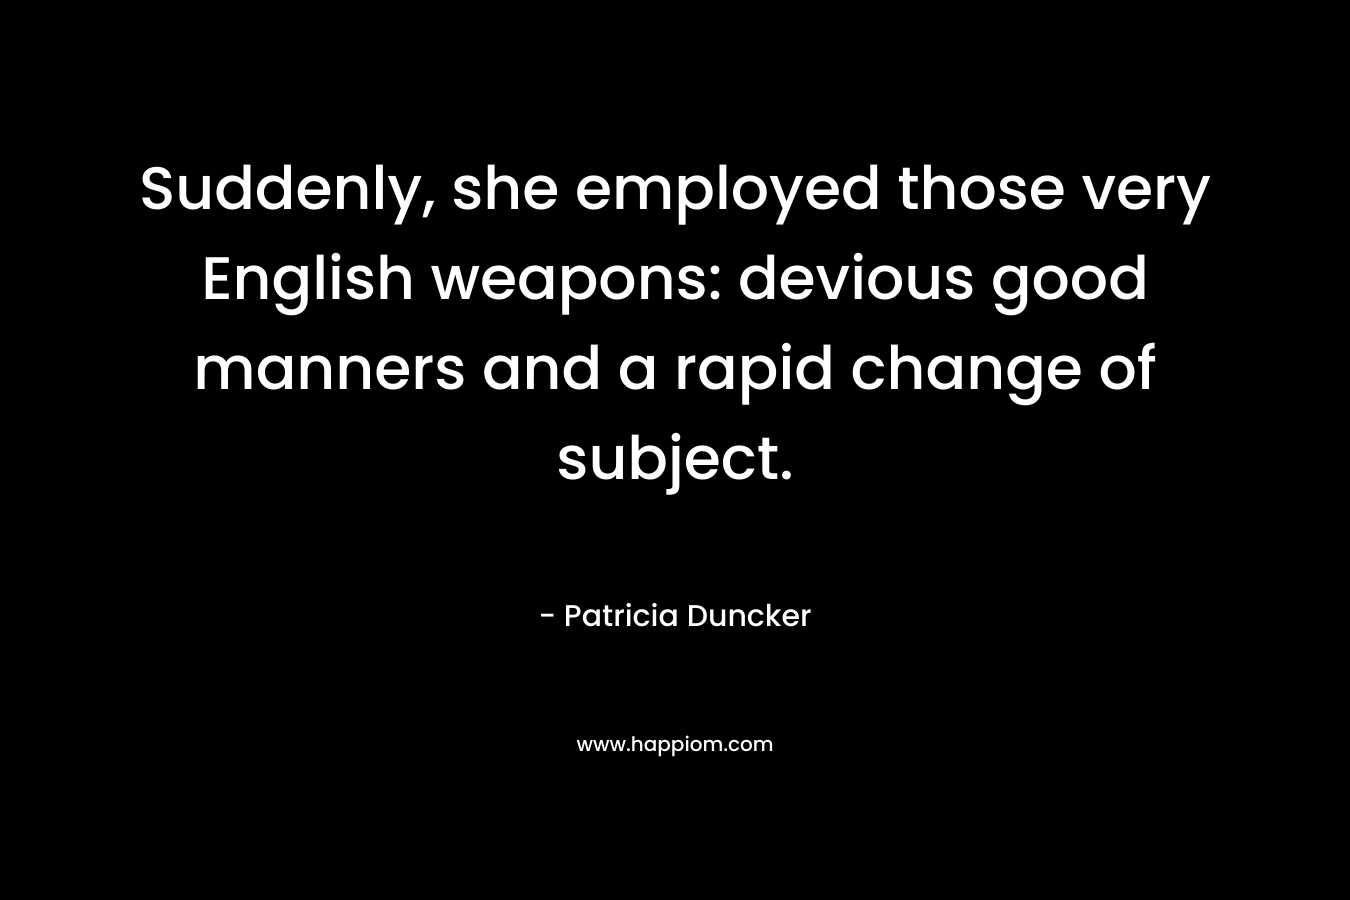 Suddenly, she employed those very English weapons: devious good manners and a rapid change of subject.